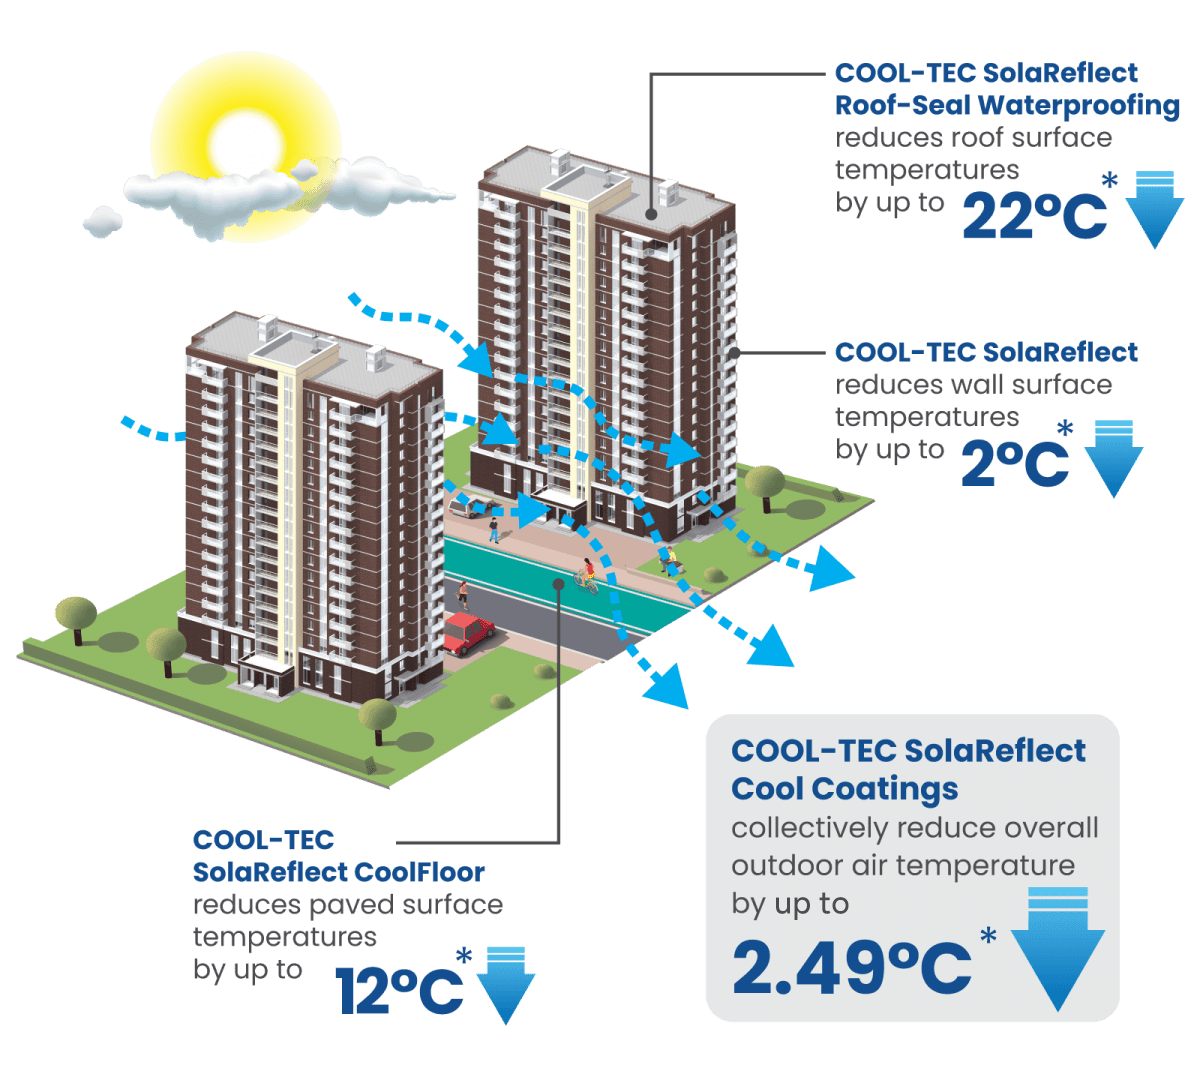 Infographic showing Cool-Tec SolaReflect Cool Coatings collectively reduce overall outdoor air temperature by up to 2.49°C